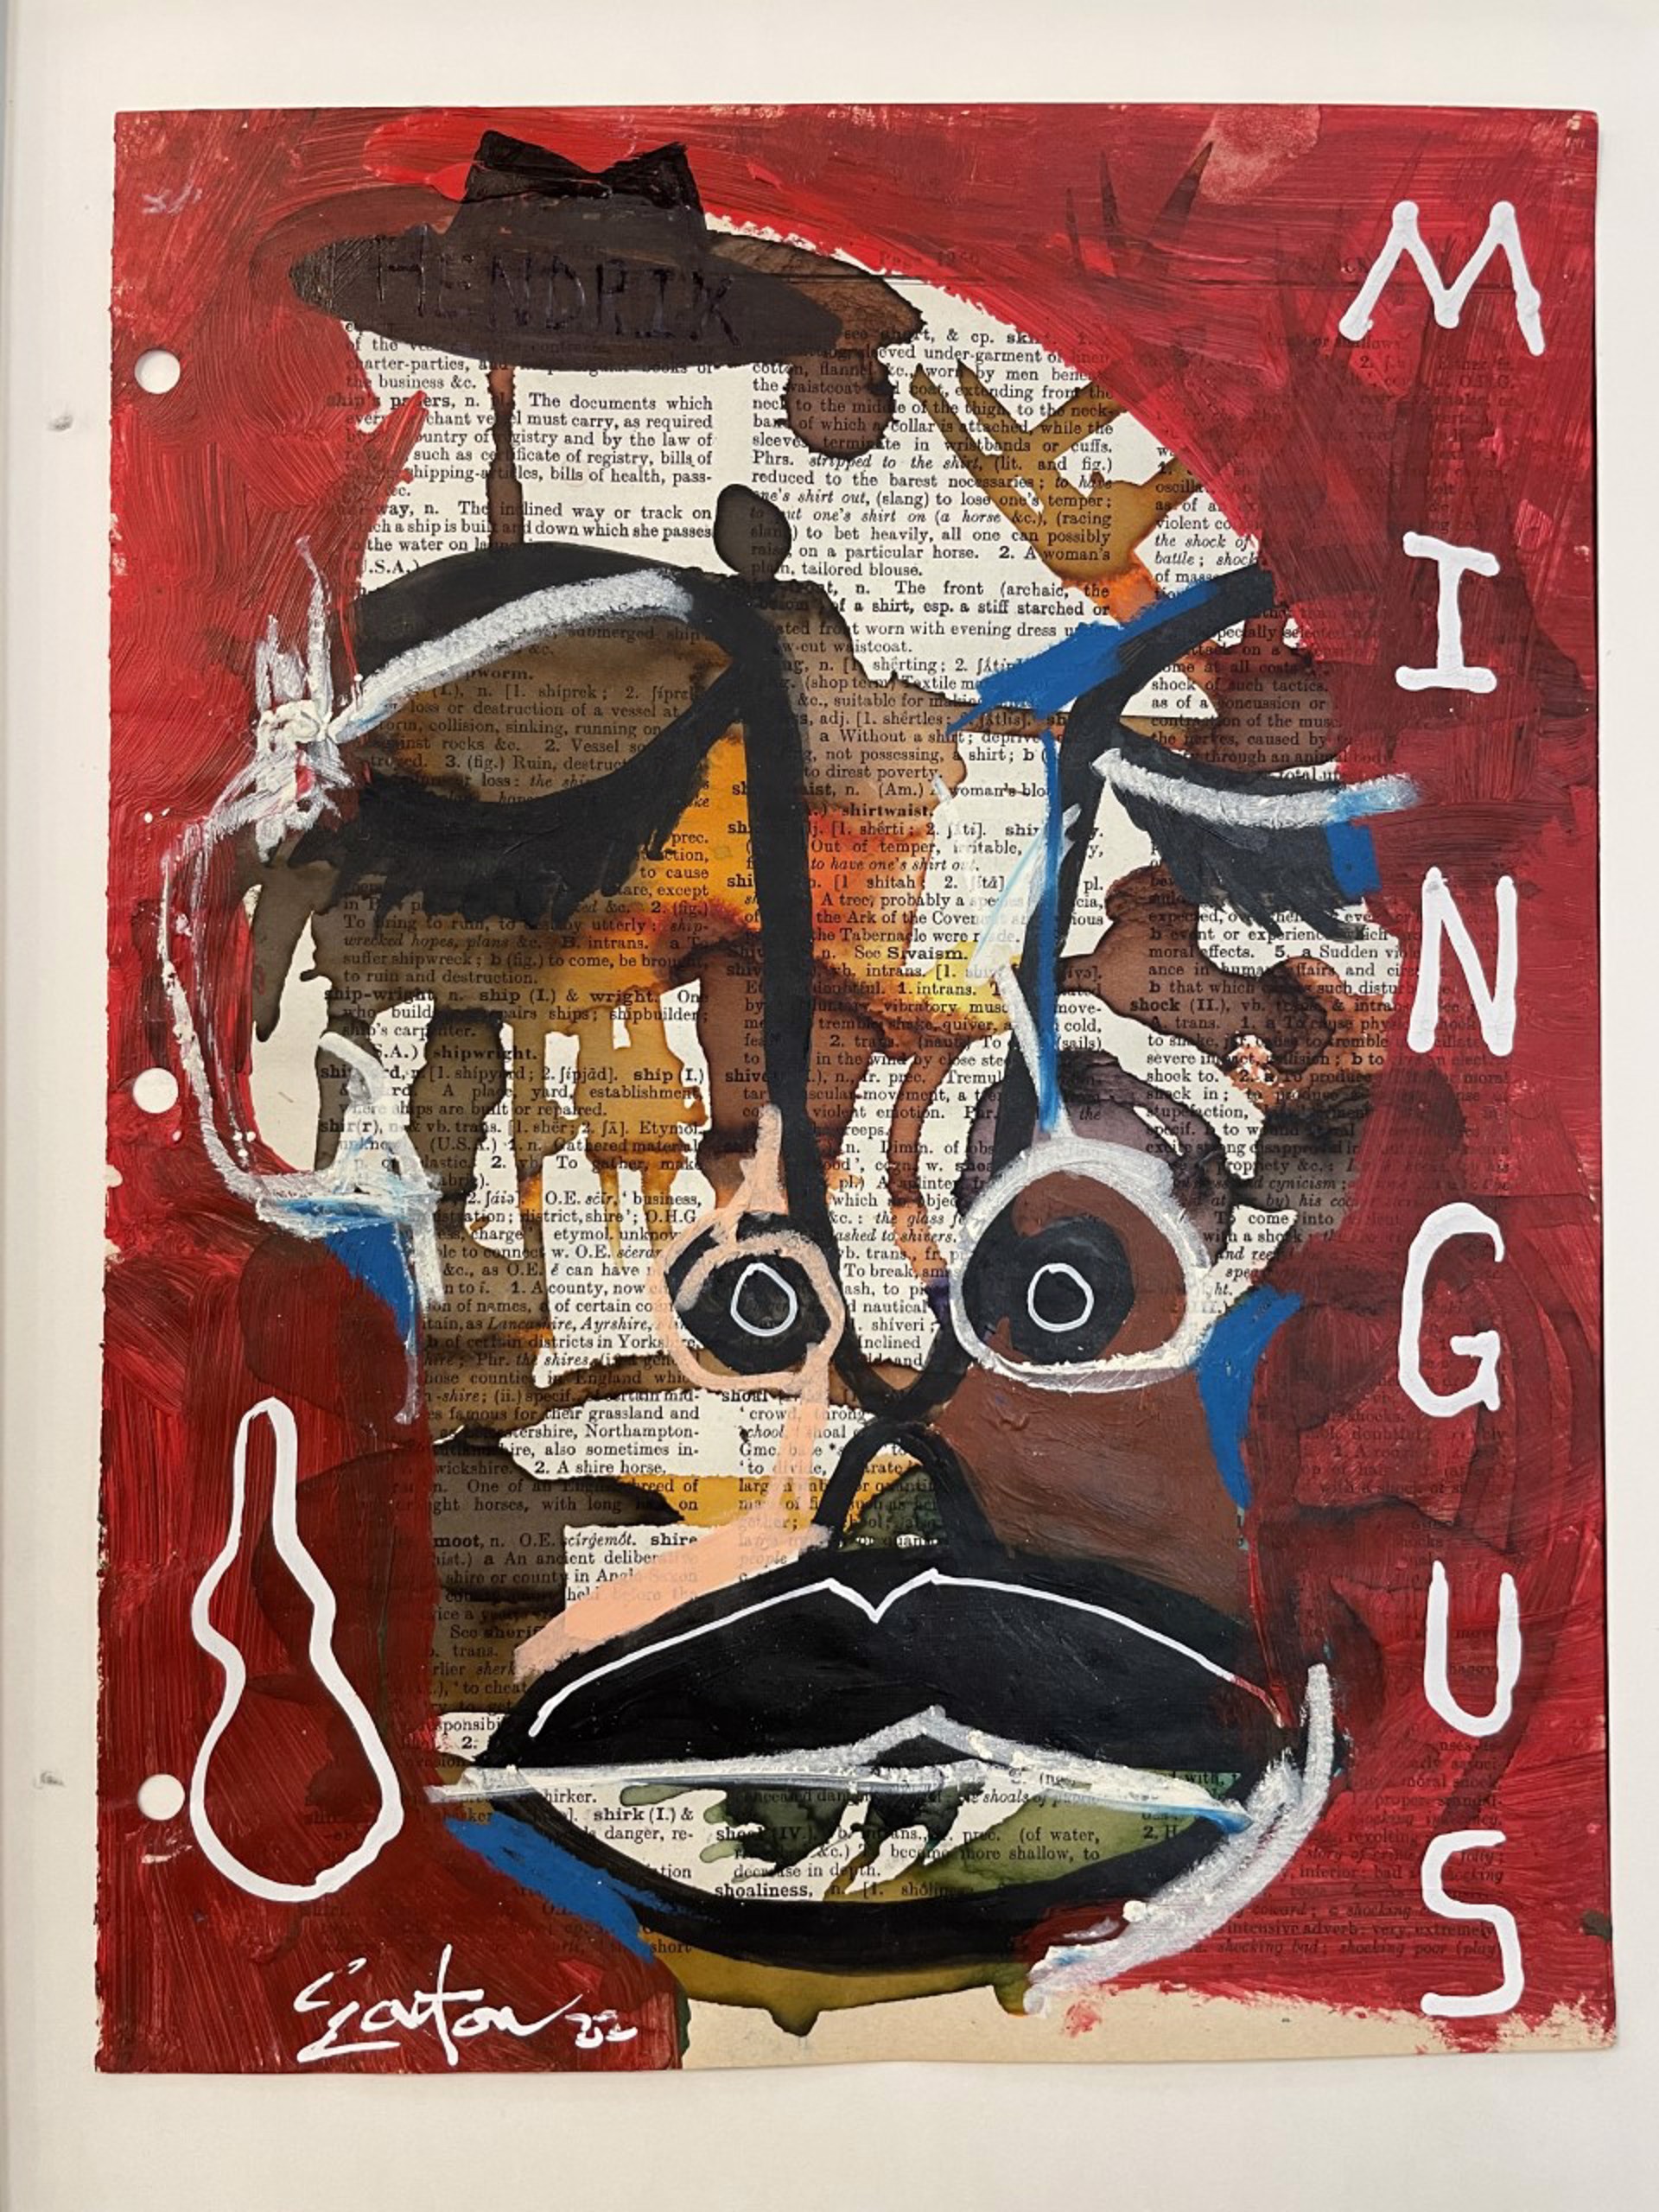 "Mingus" by Easton Davy